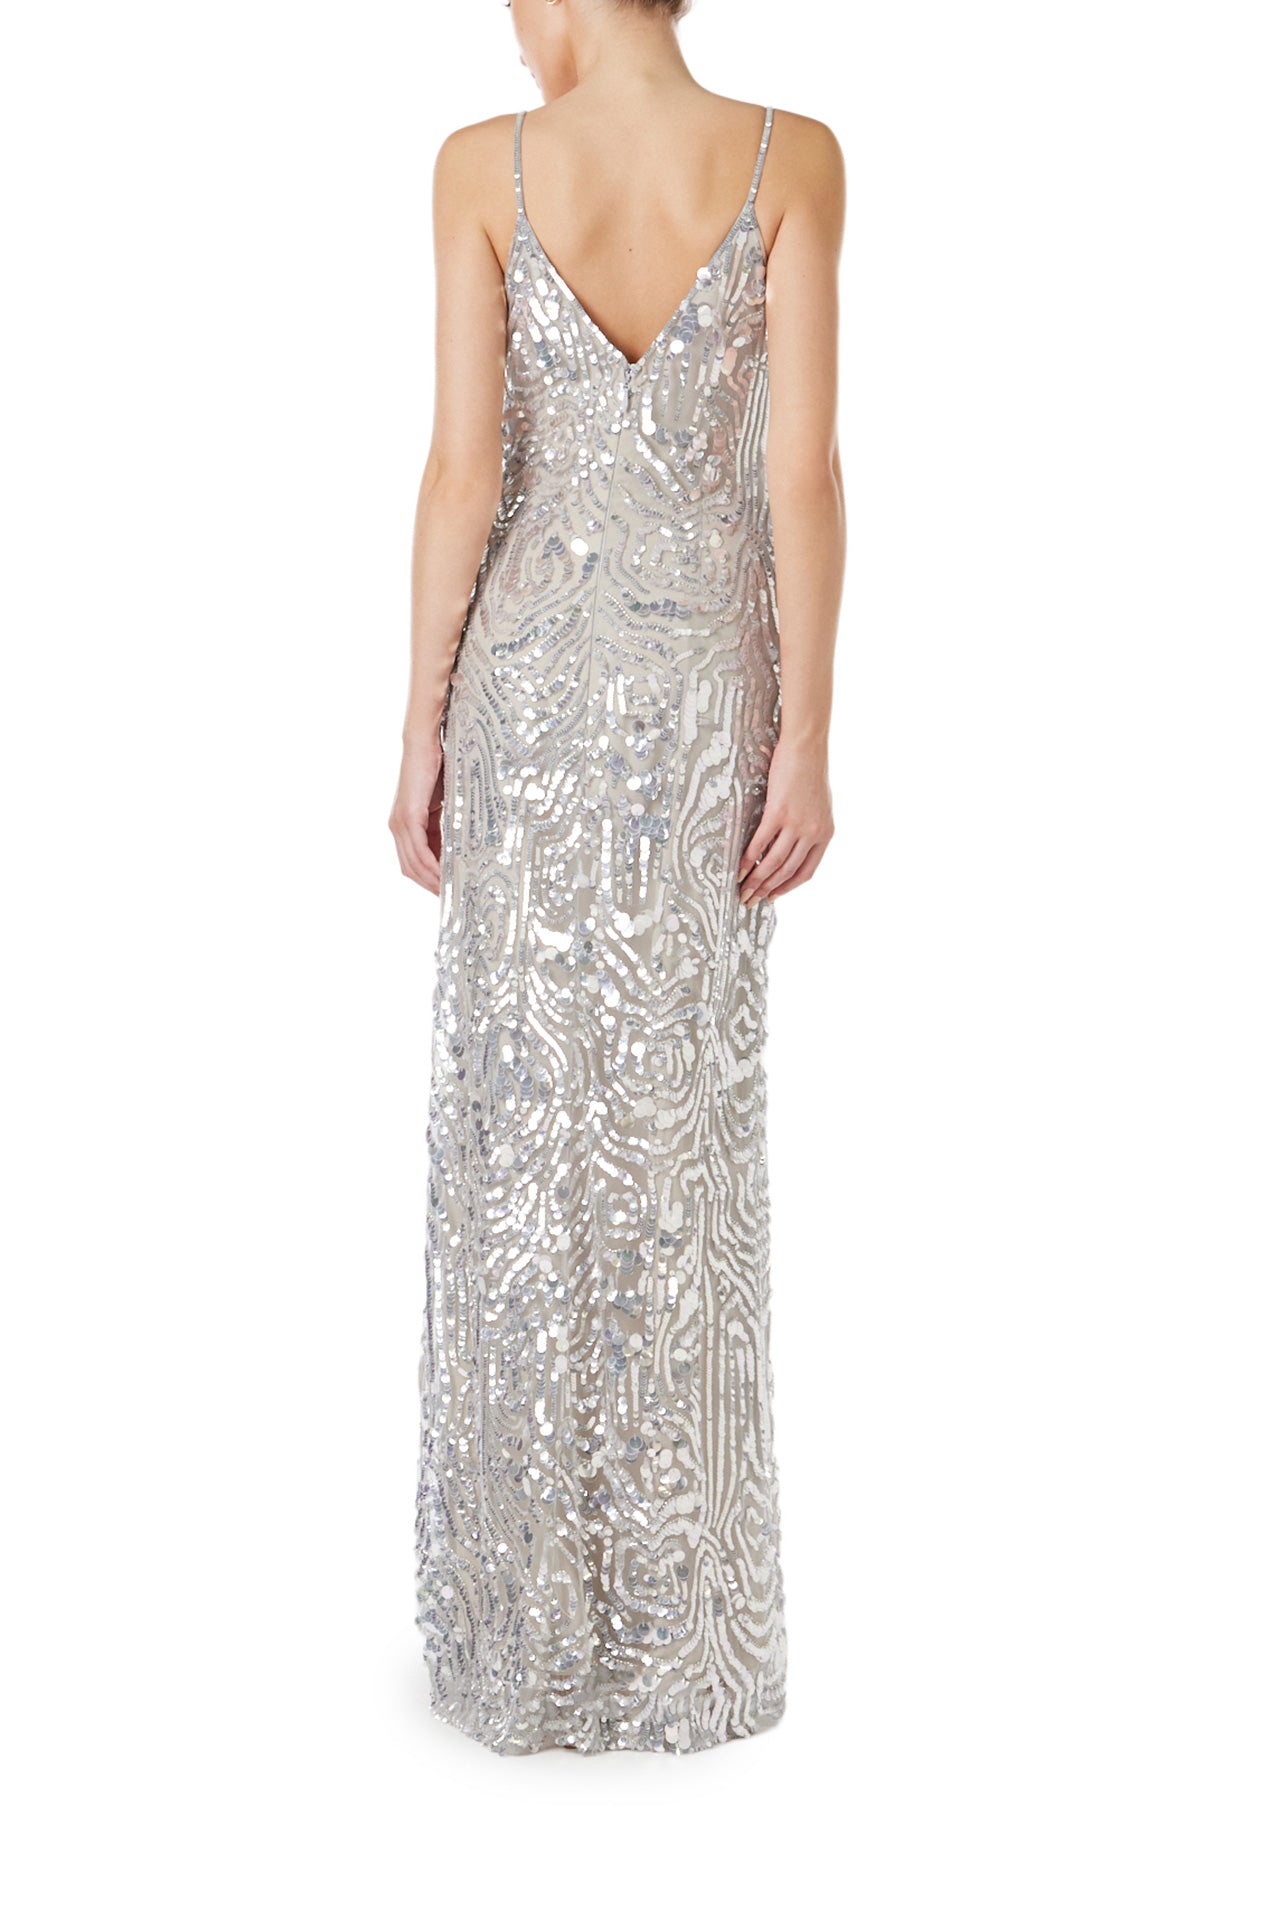 Monique Lhuillier Spring 2024 silver sequin slip gown with deep v neckline and high front slit - back.